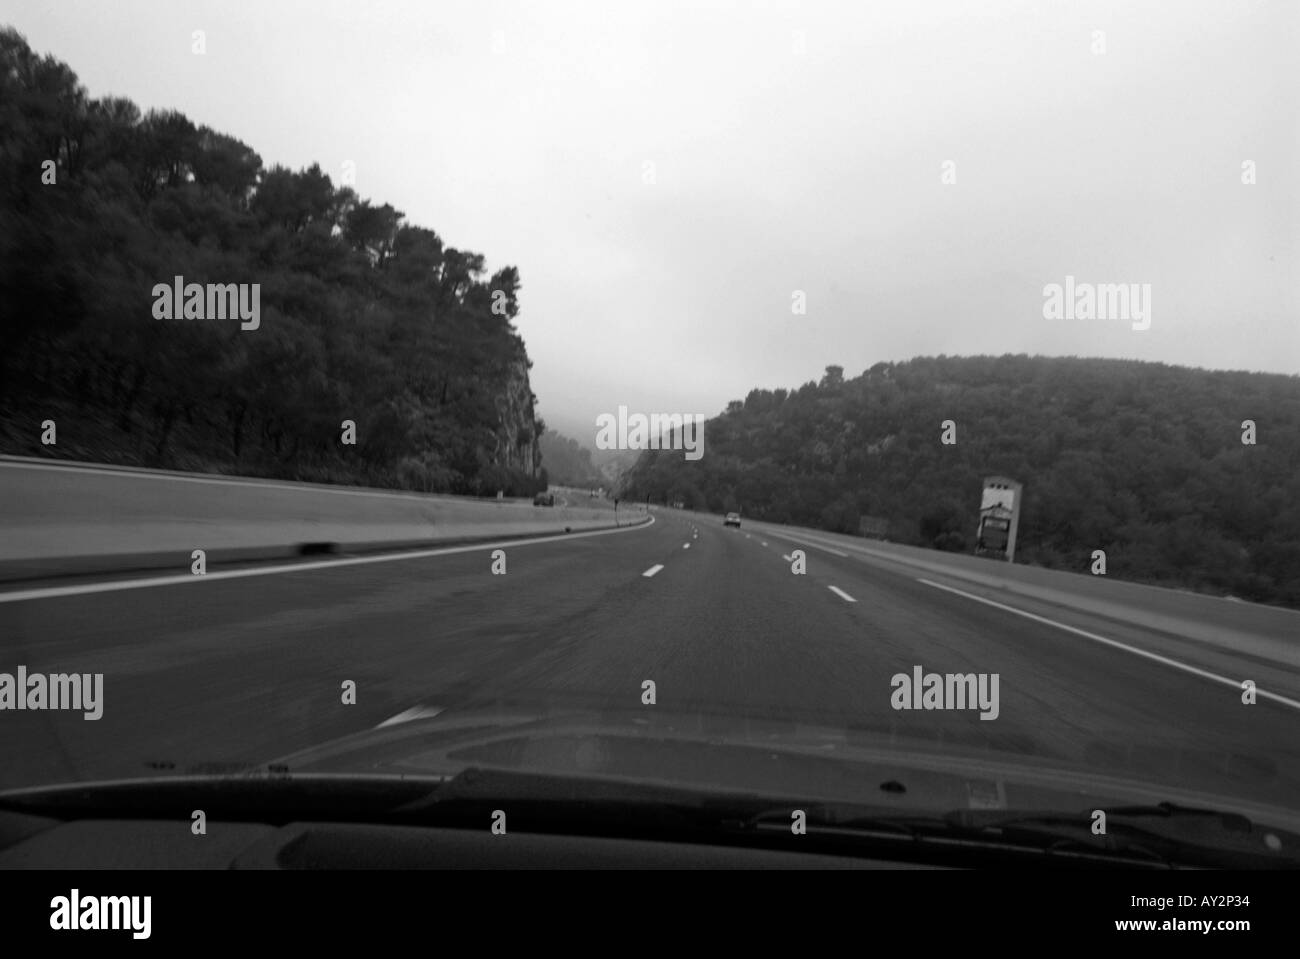 France provence inside a speeding car on a8 highway Stock Photo